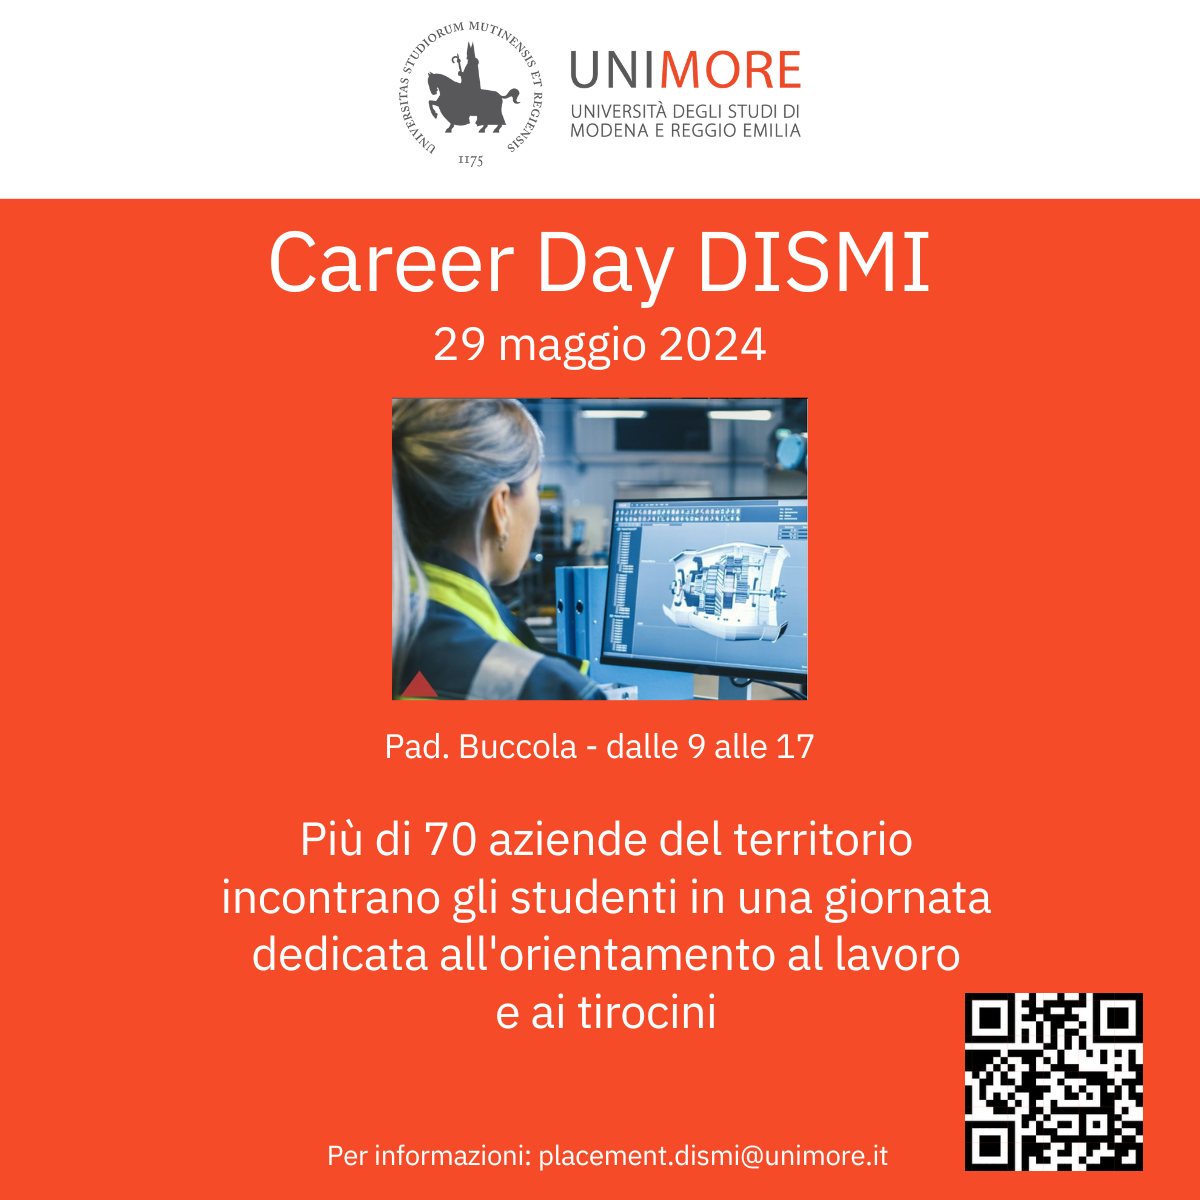 Join Us at Unimore Career Day on May 29, 2024!